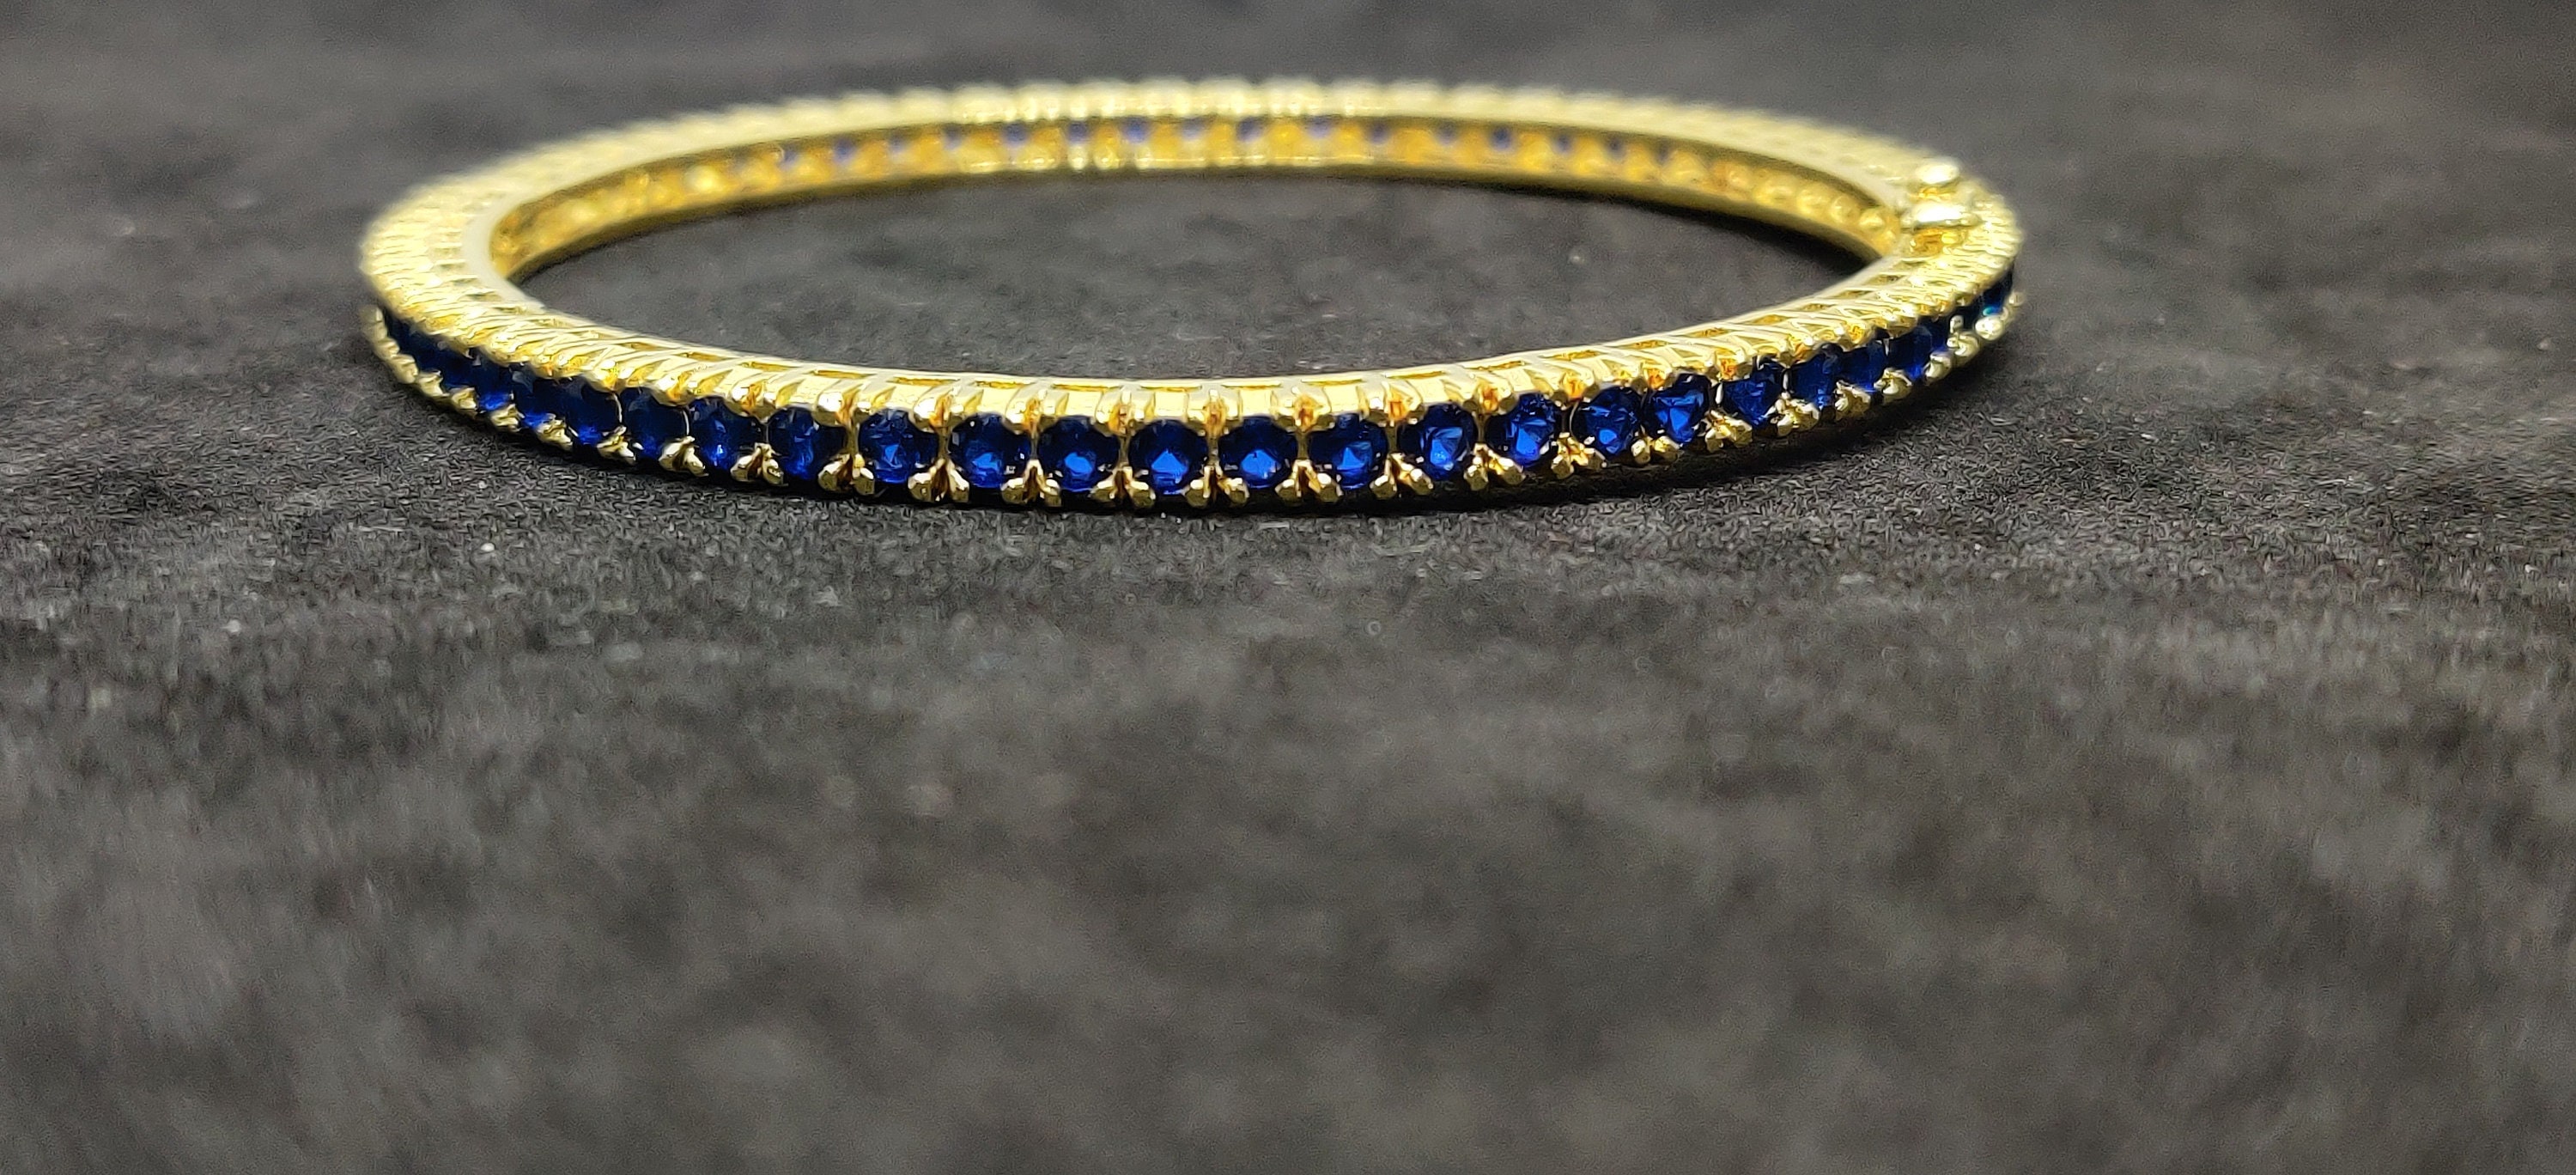 Blue Sapphire Diamond Bangle Bracelet With 14Kt Yellow Gold Finish On Sterling Silver, Gift For Her